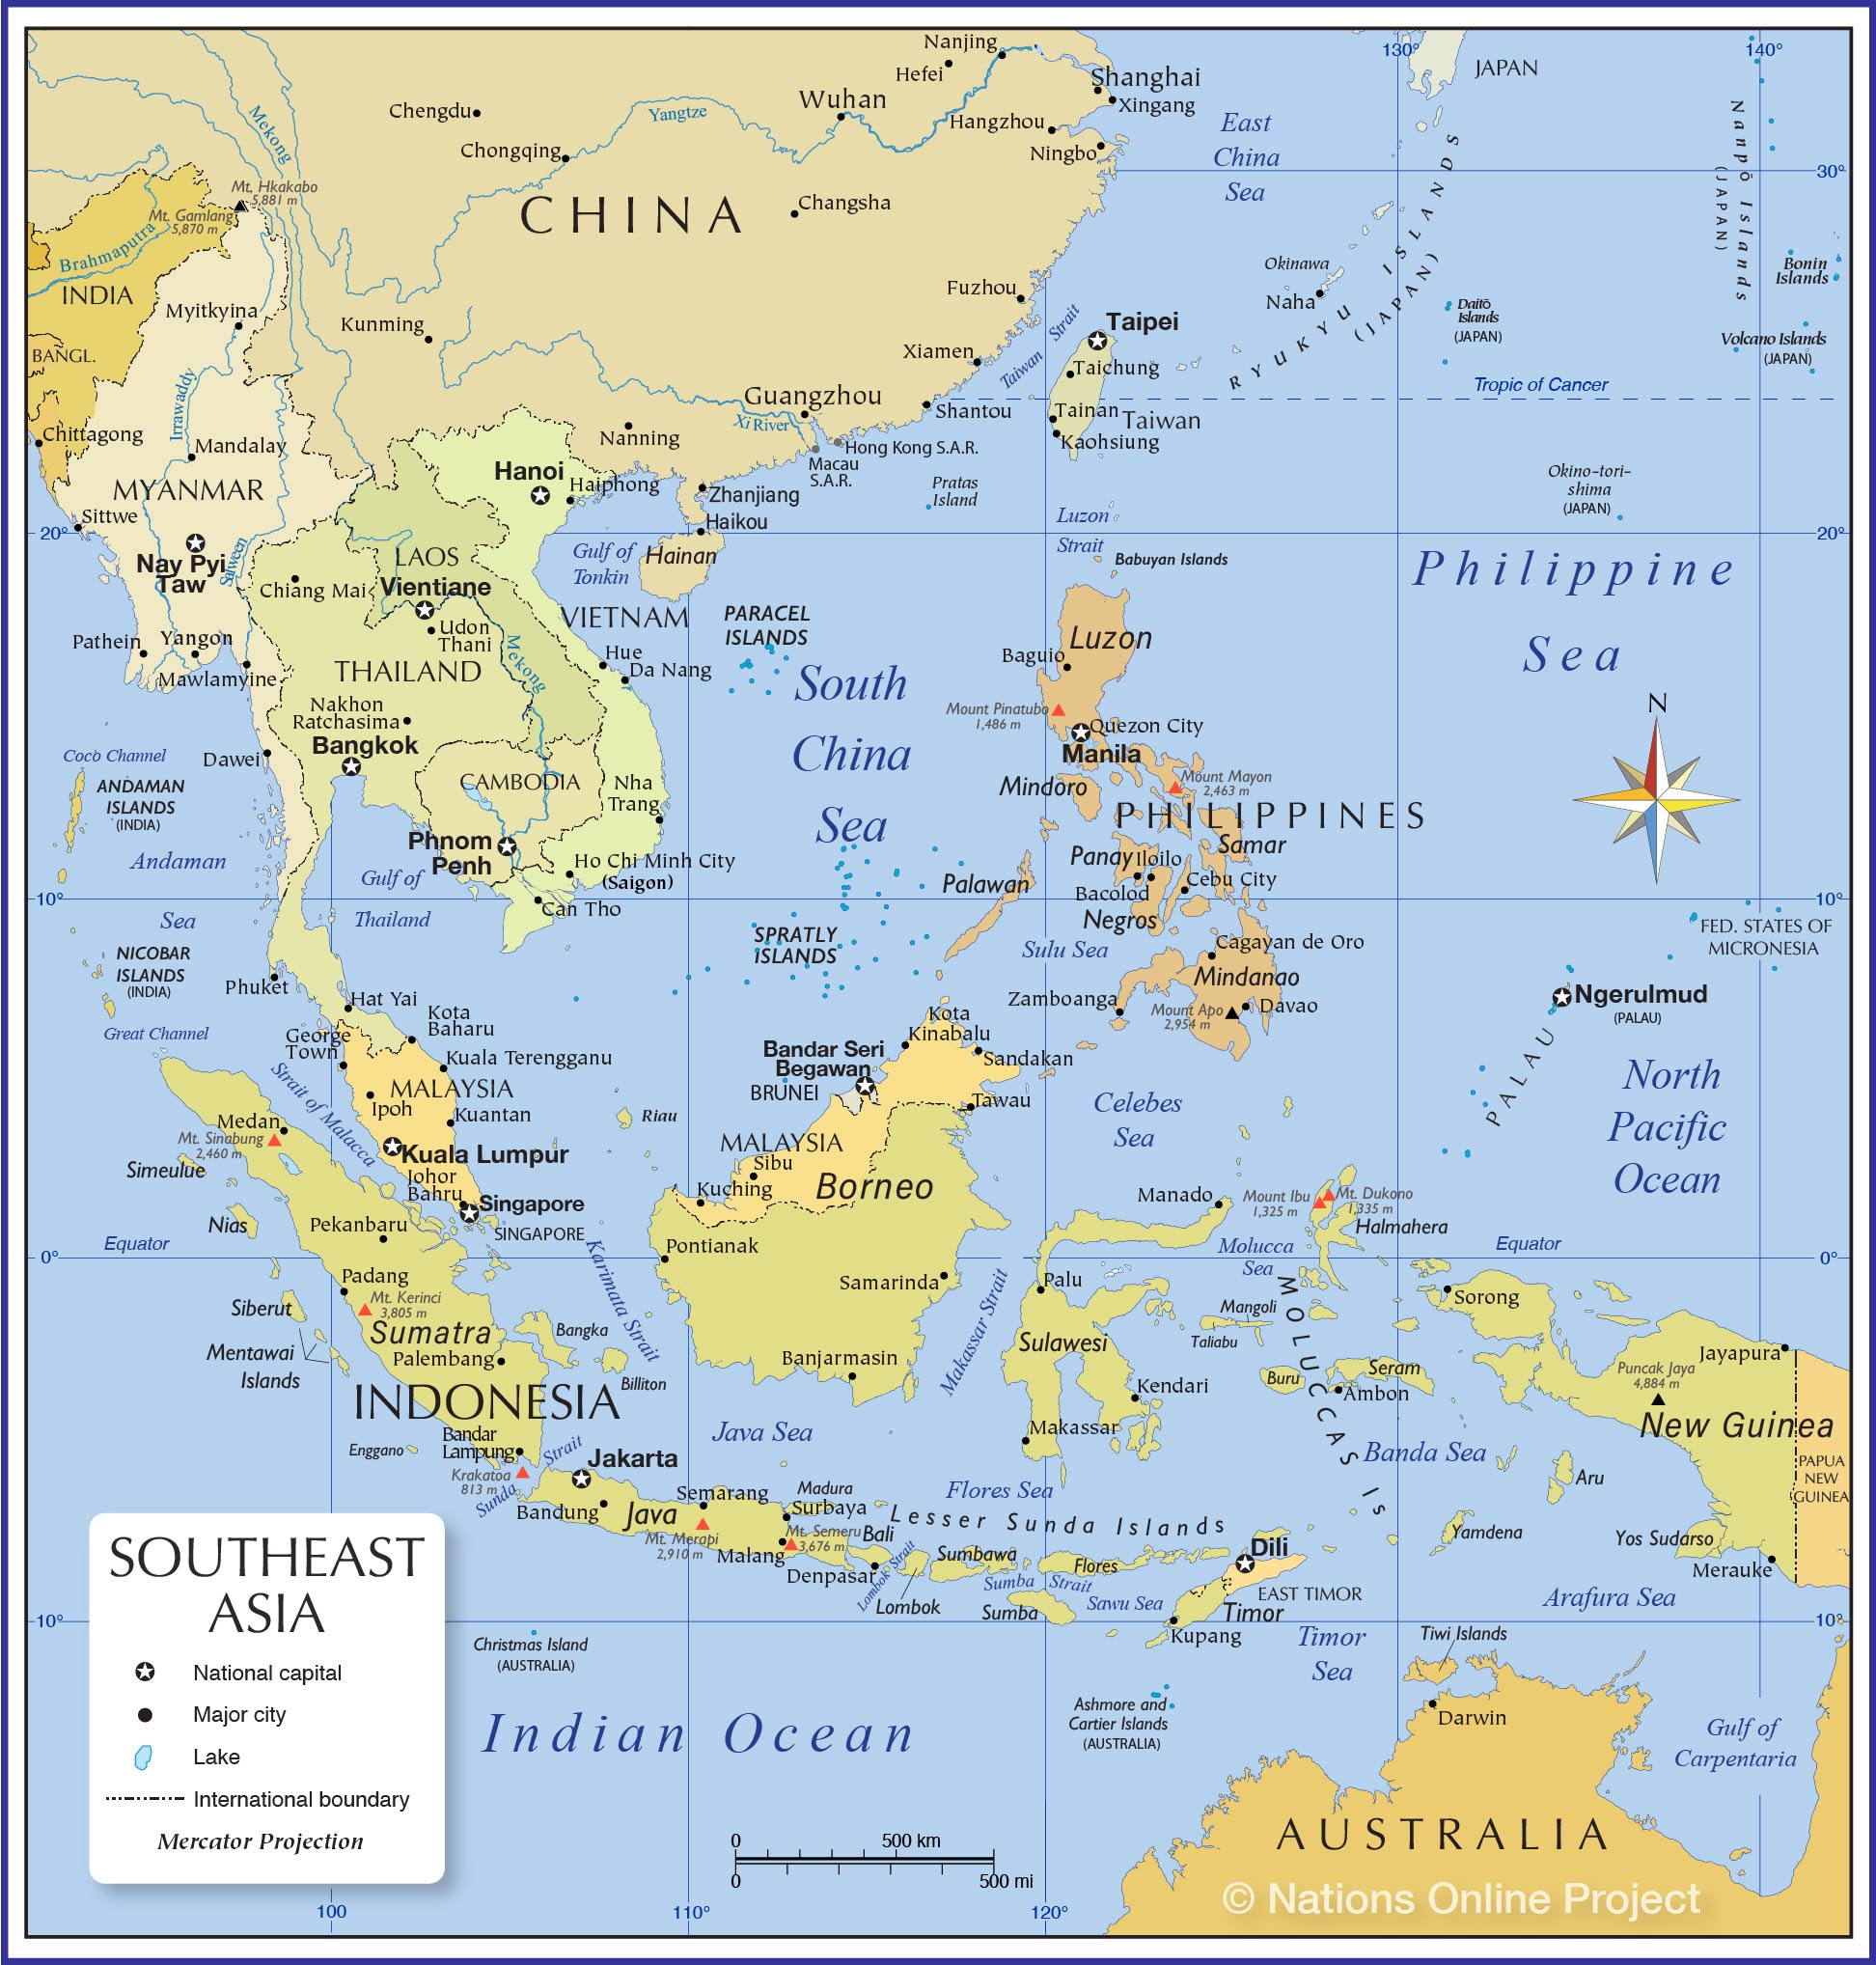 southeast asian countries map Map Of South East Asia Nations Online Project southeast asian countries map